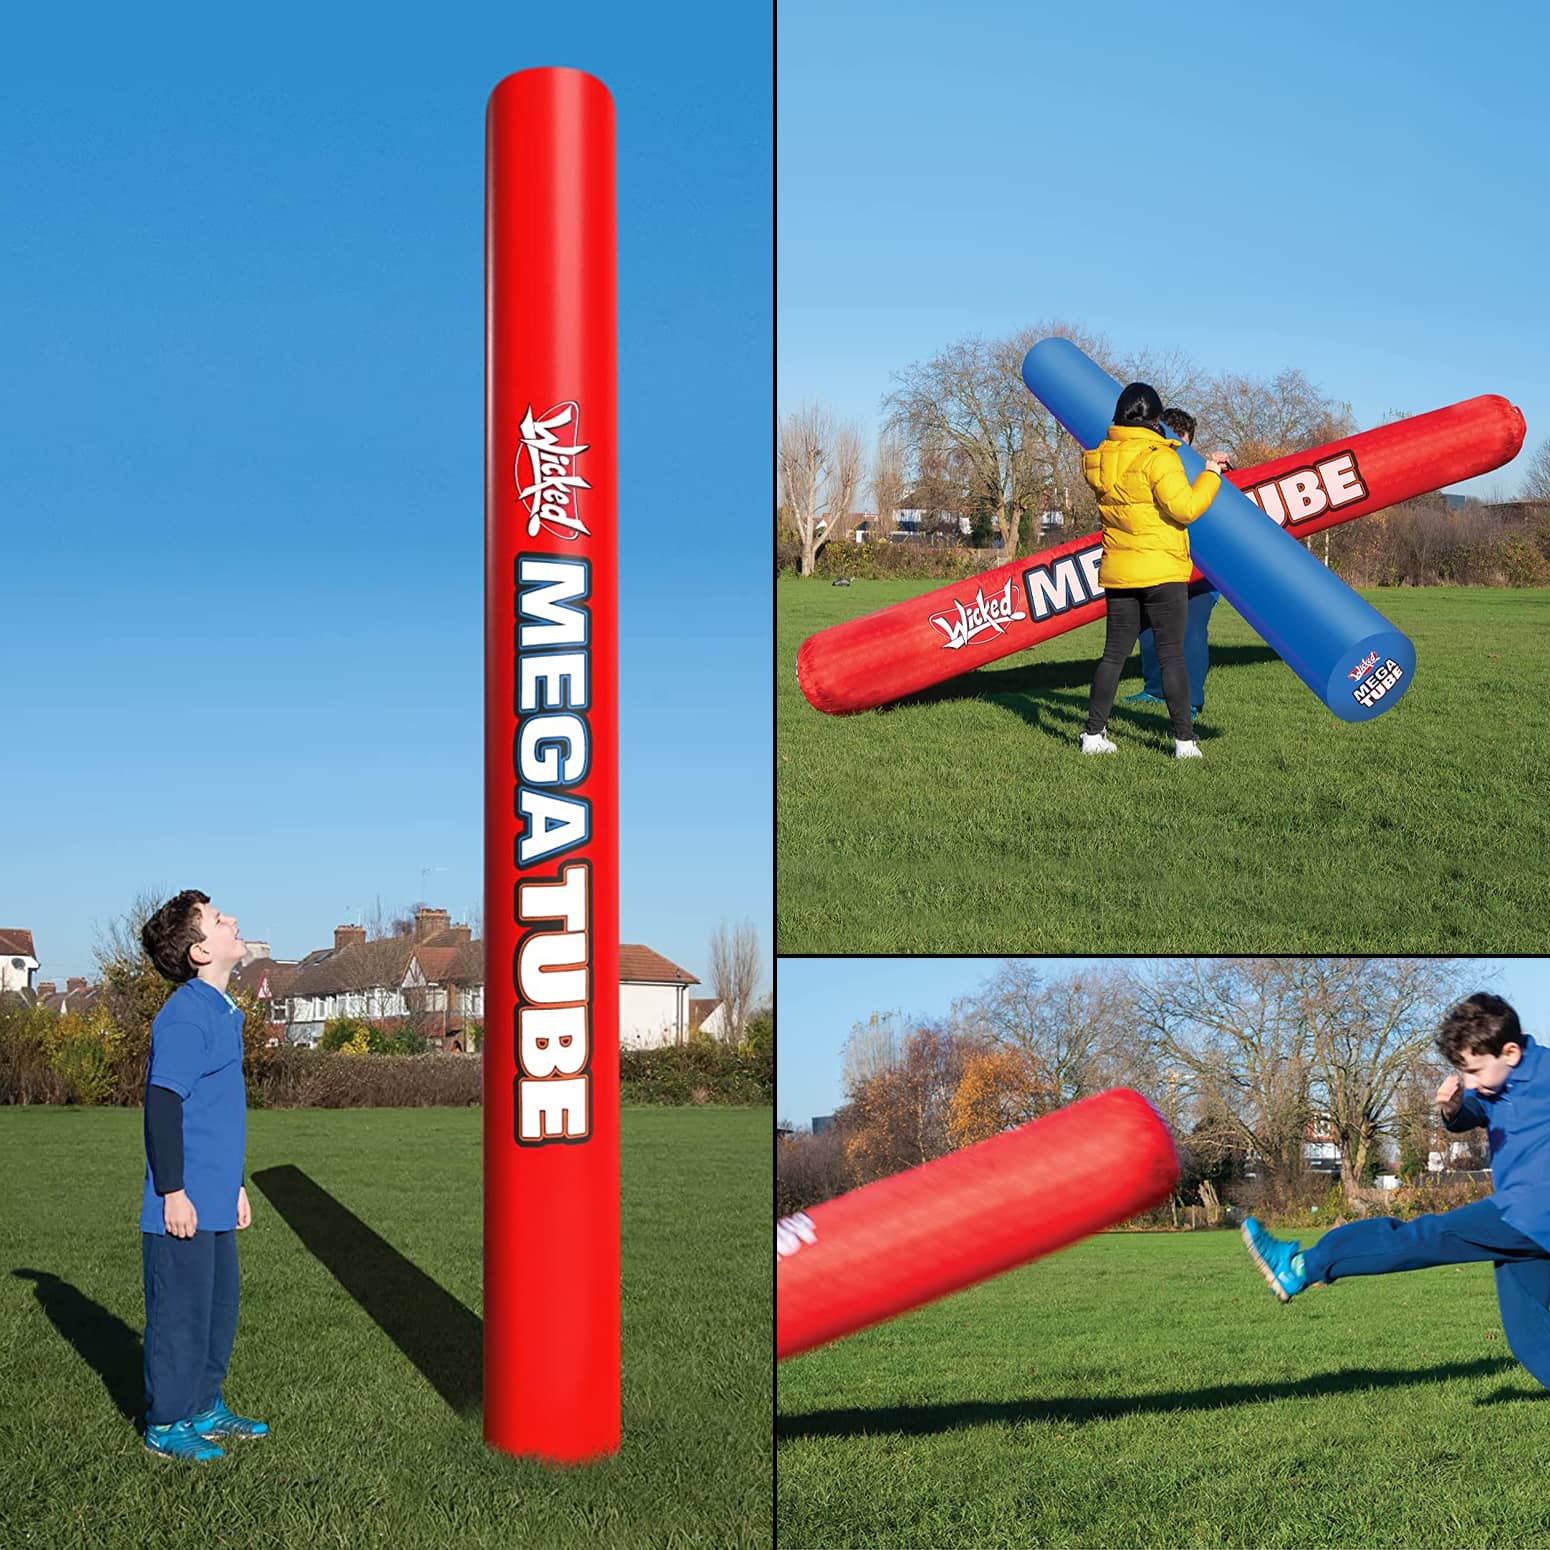 Mega Tube - Gigantic 10 Foot Tall Inflatable Tube For Endless Fun... and Battle!